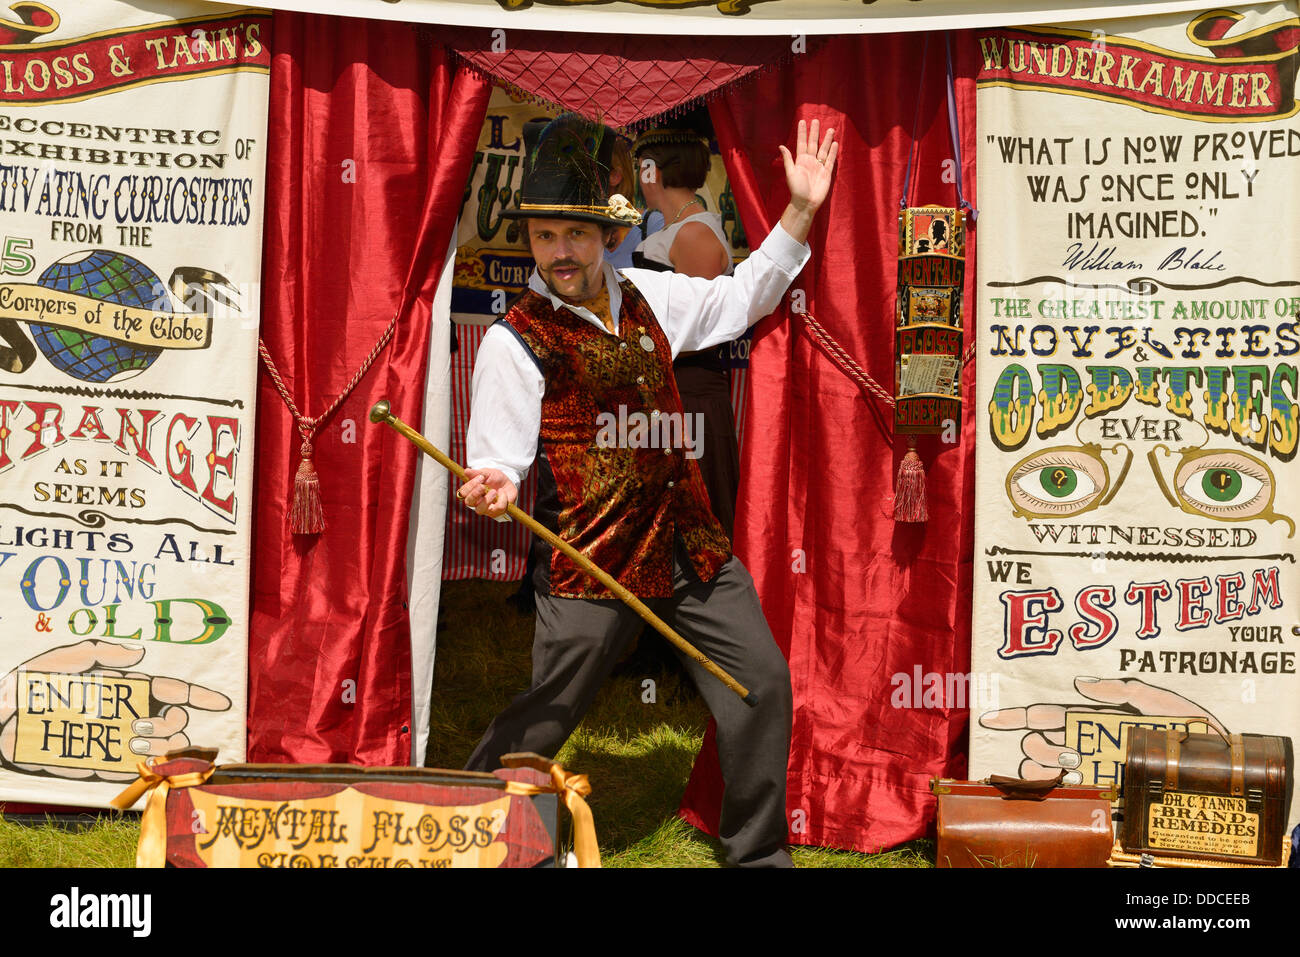 Sideshow illusionist and hustler at Coldwater Canadiana Heritage Museum steampunk festival Ontario Canada Stock Photo